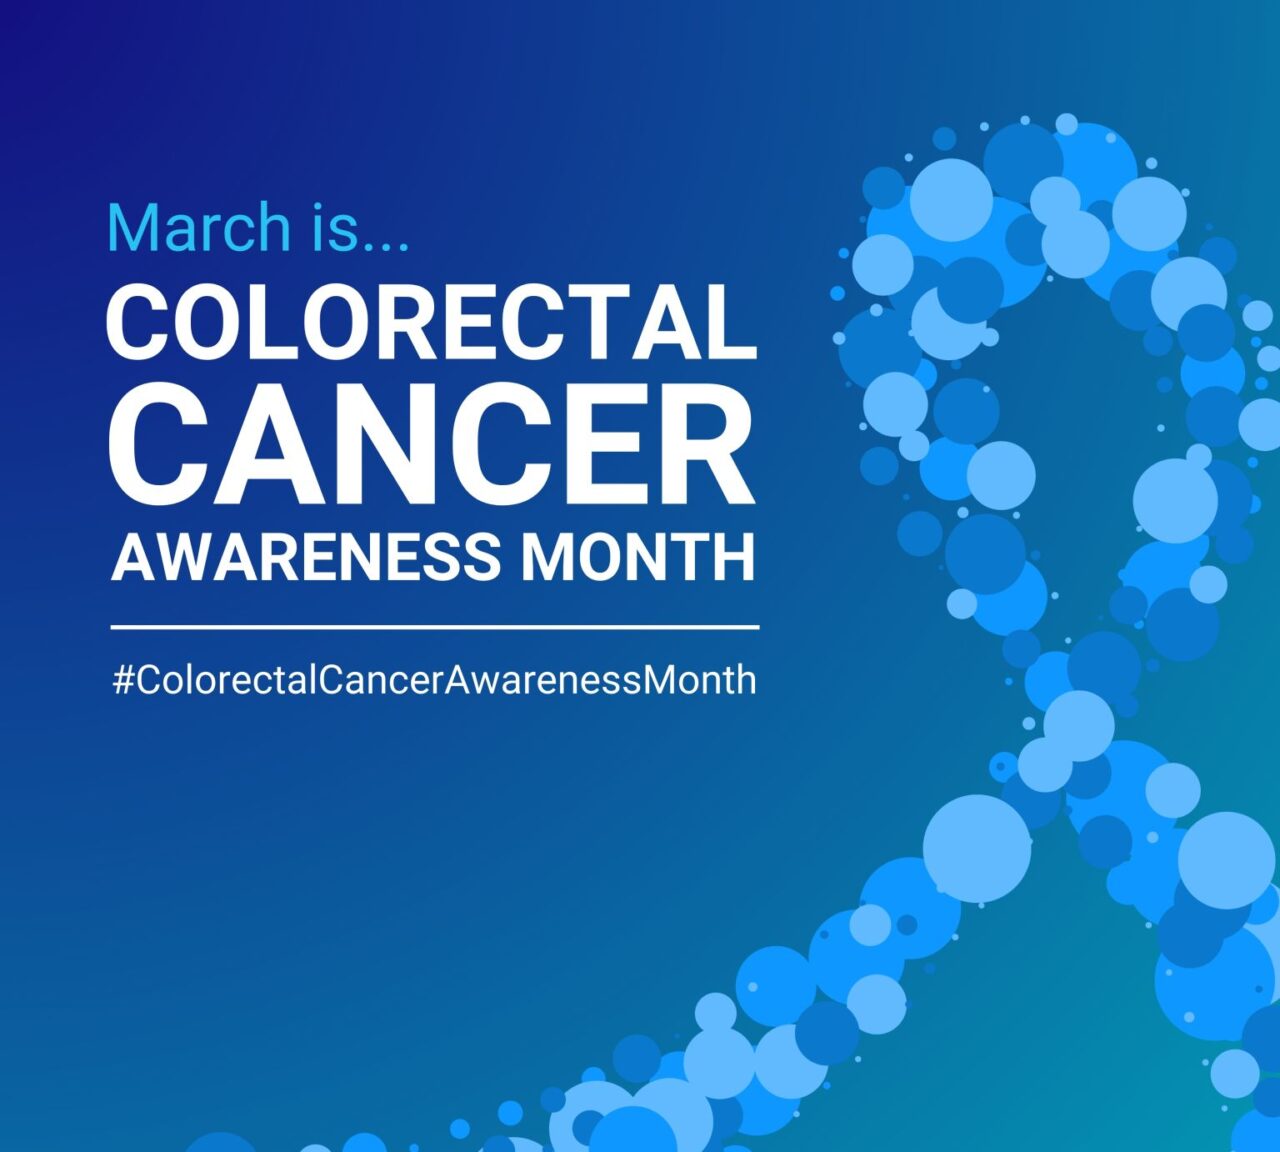 Agenus joins the colorectal cancer community around the globe to bring attention and raise awareness on the second leading cause of cancer death in the United States – Agenus